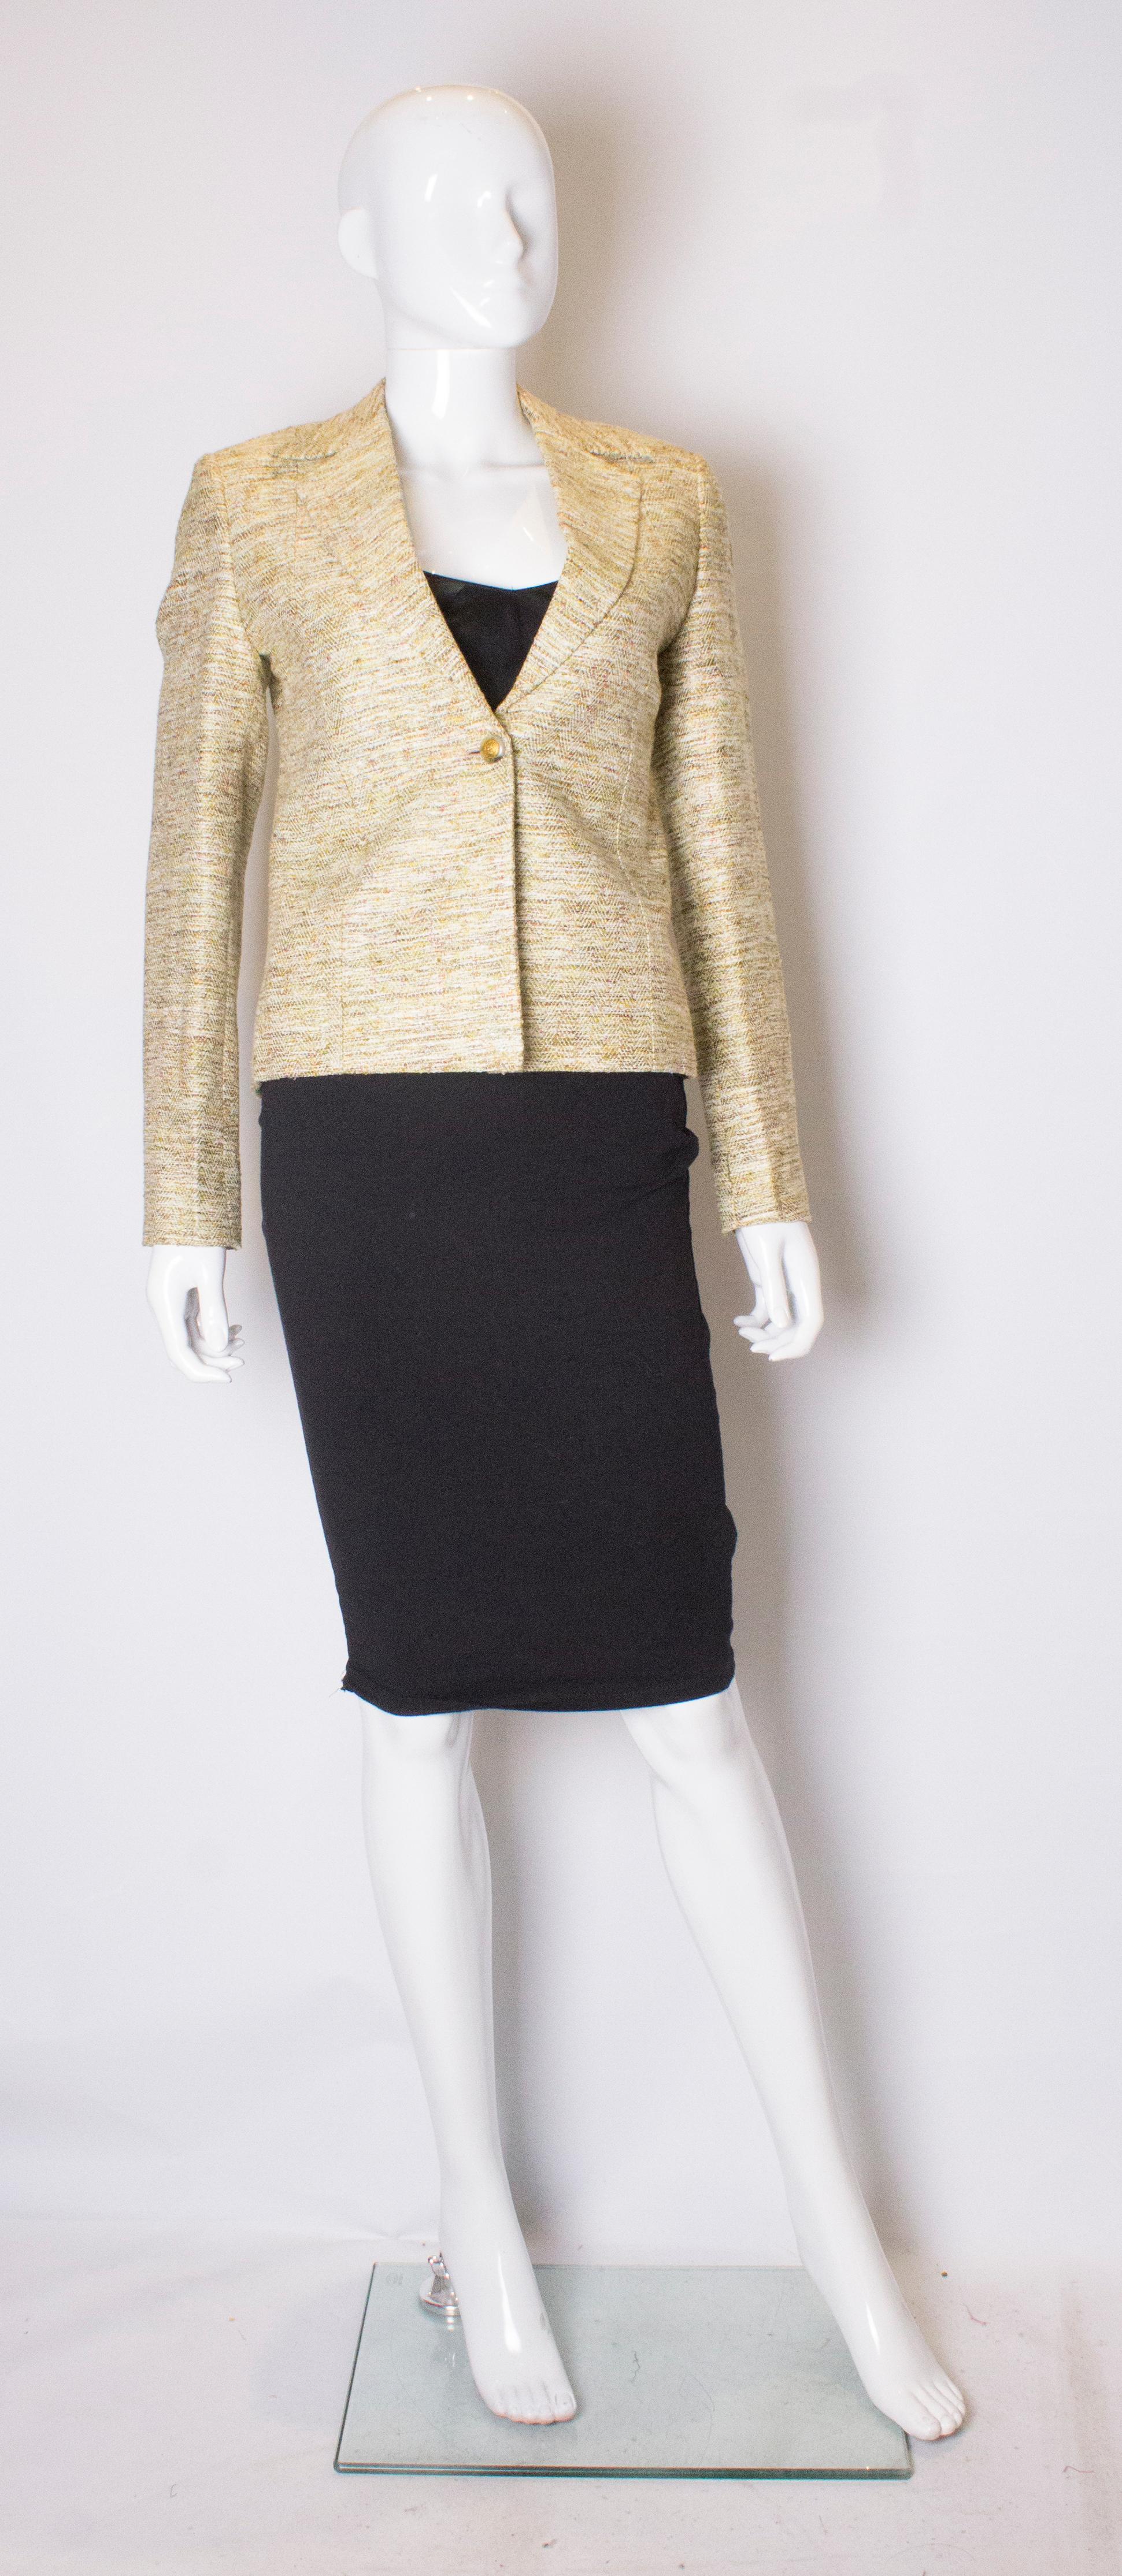 A vintage green tweed like jacket with an attractive collar. The jacket has a one button central fastening and two button cuffs. It is fully lined and has small shoulder pads.